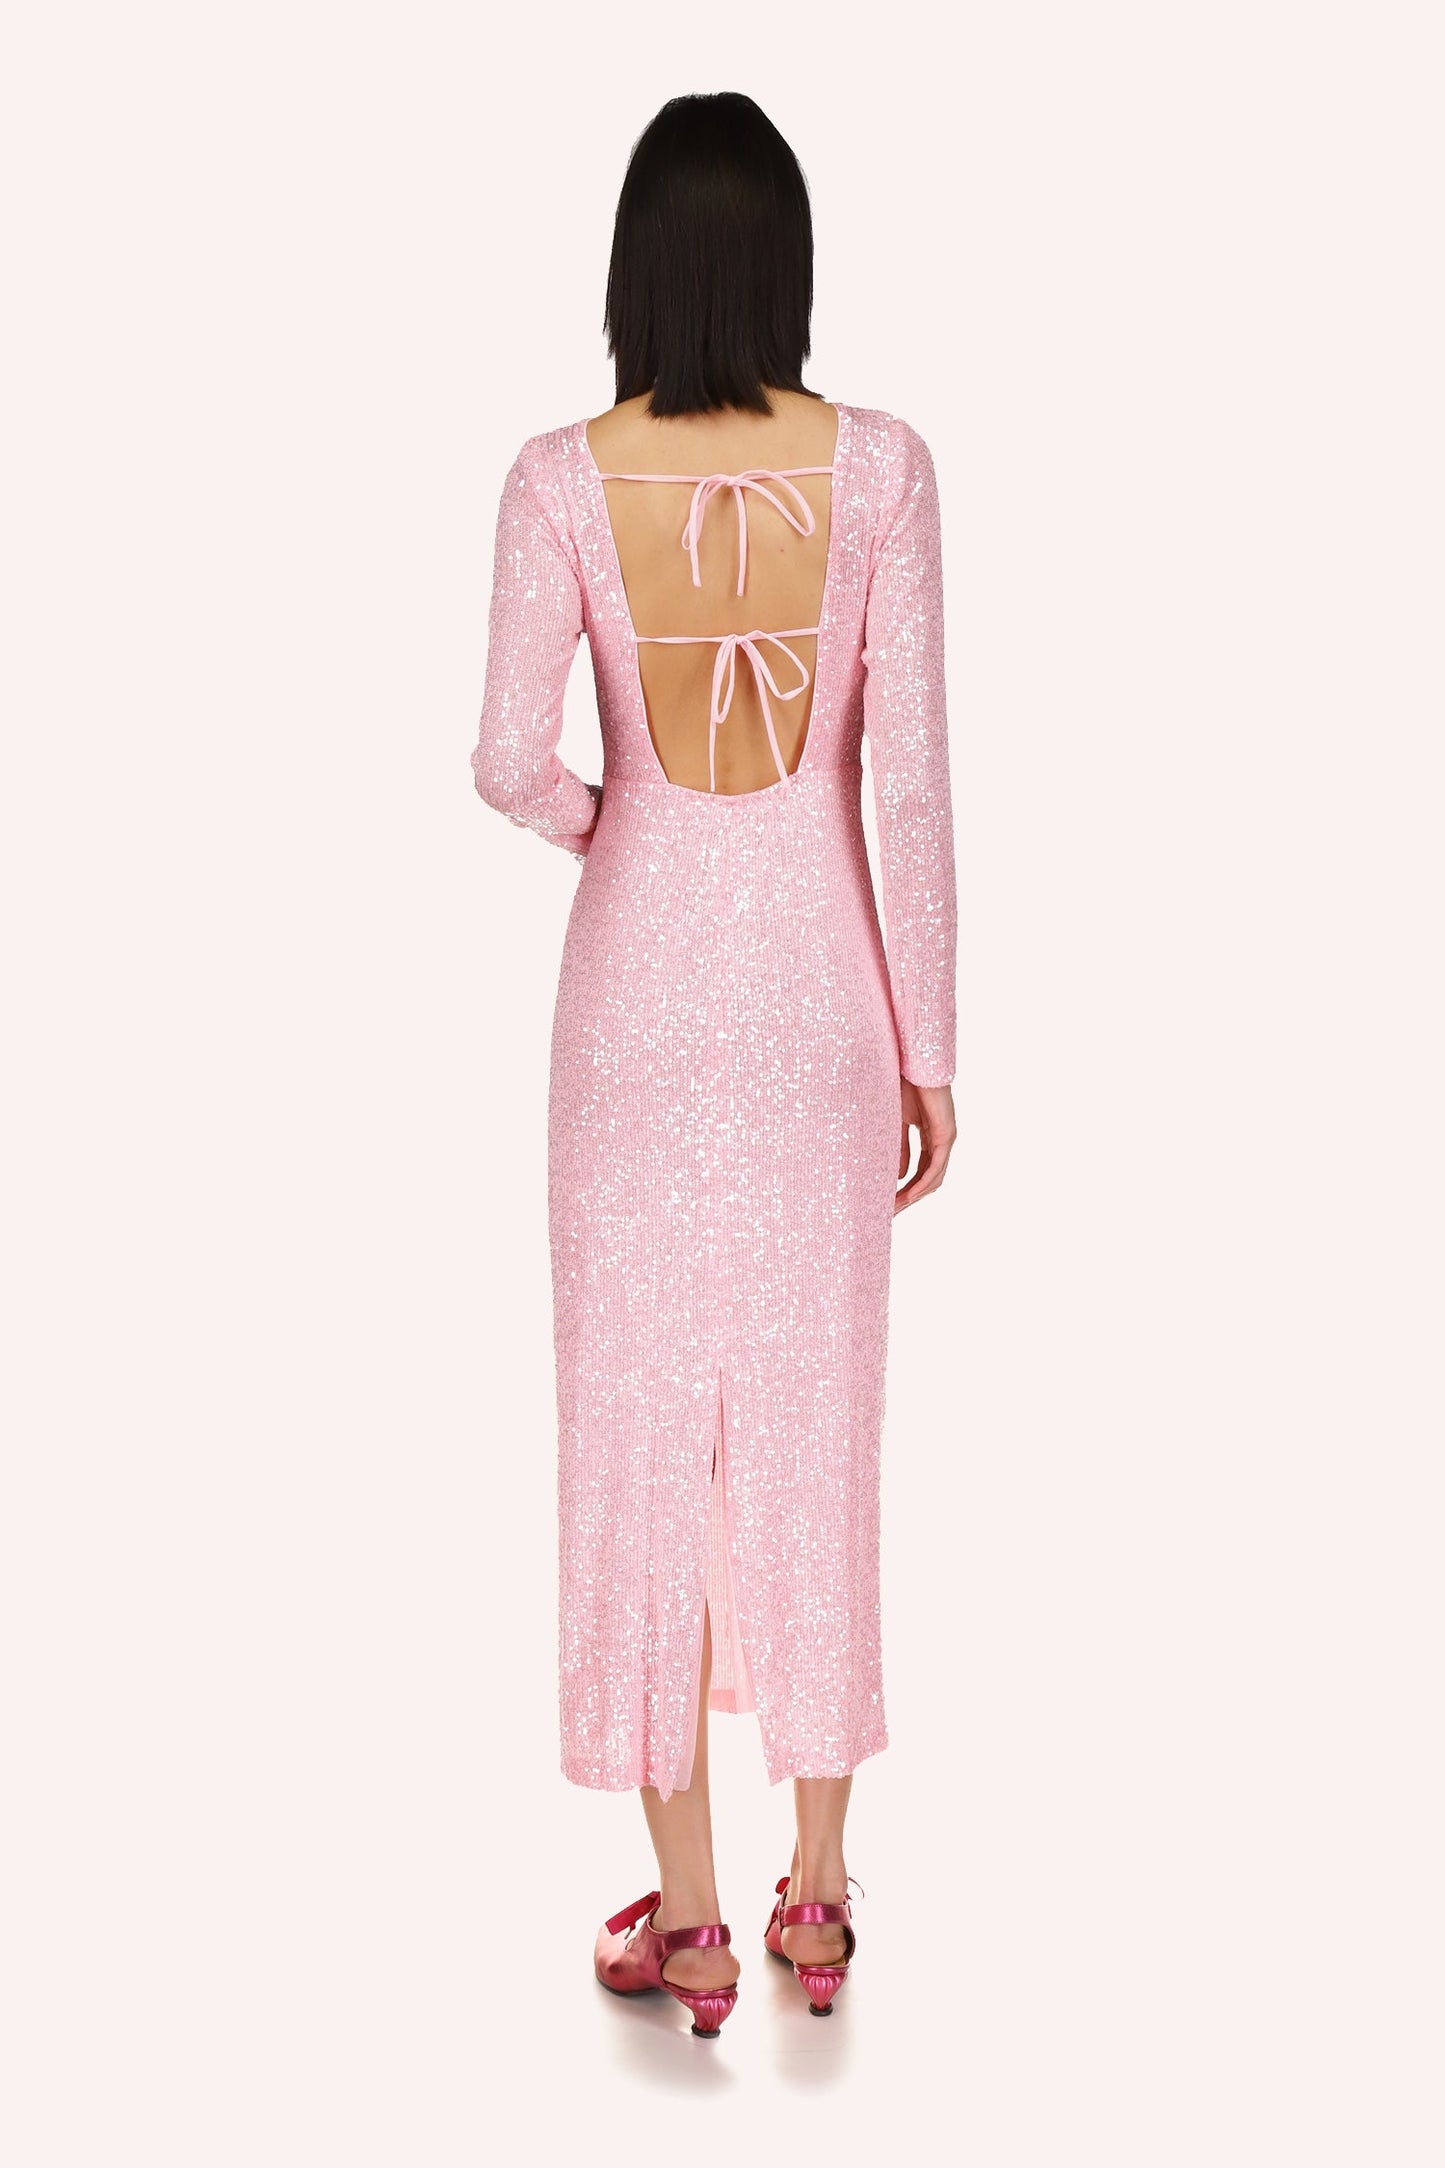 The dress reveals a nude back, 2-straps to secure it in place, slit at the bottom up to mid-legs